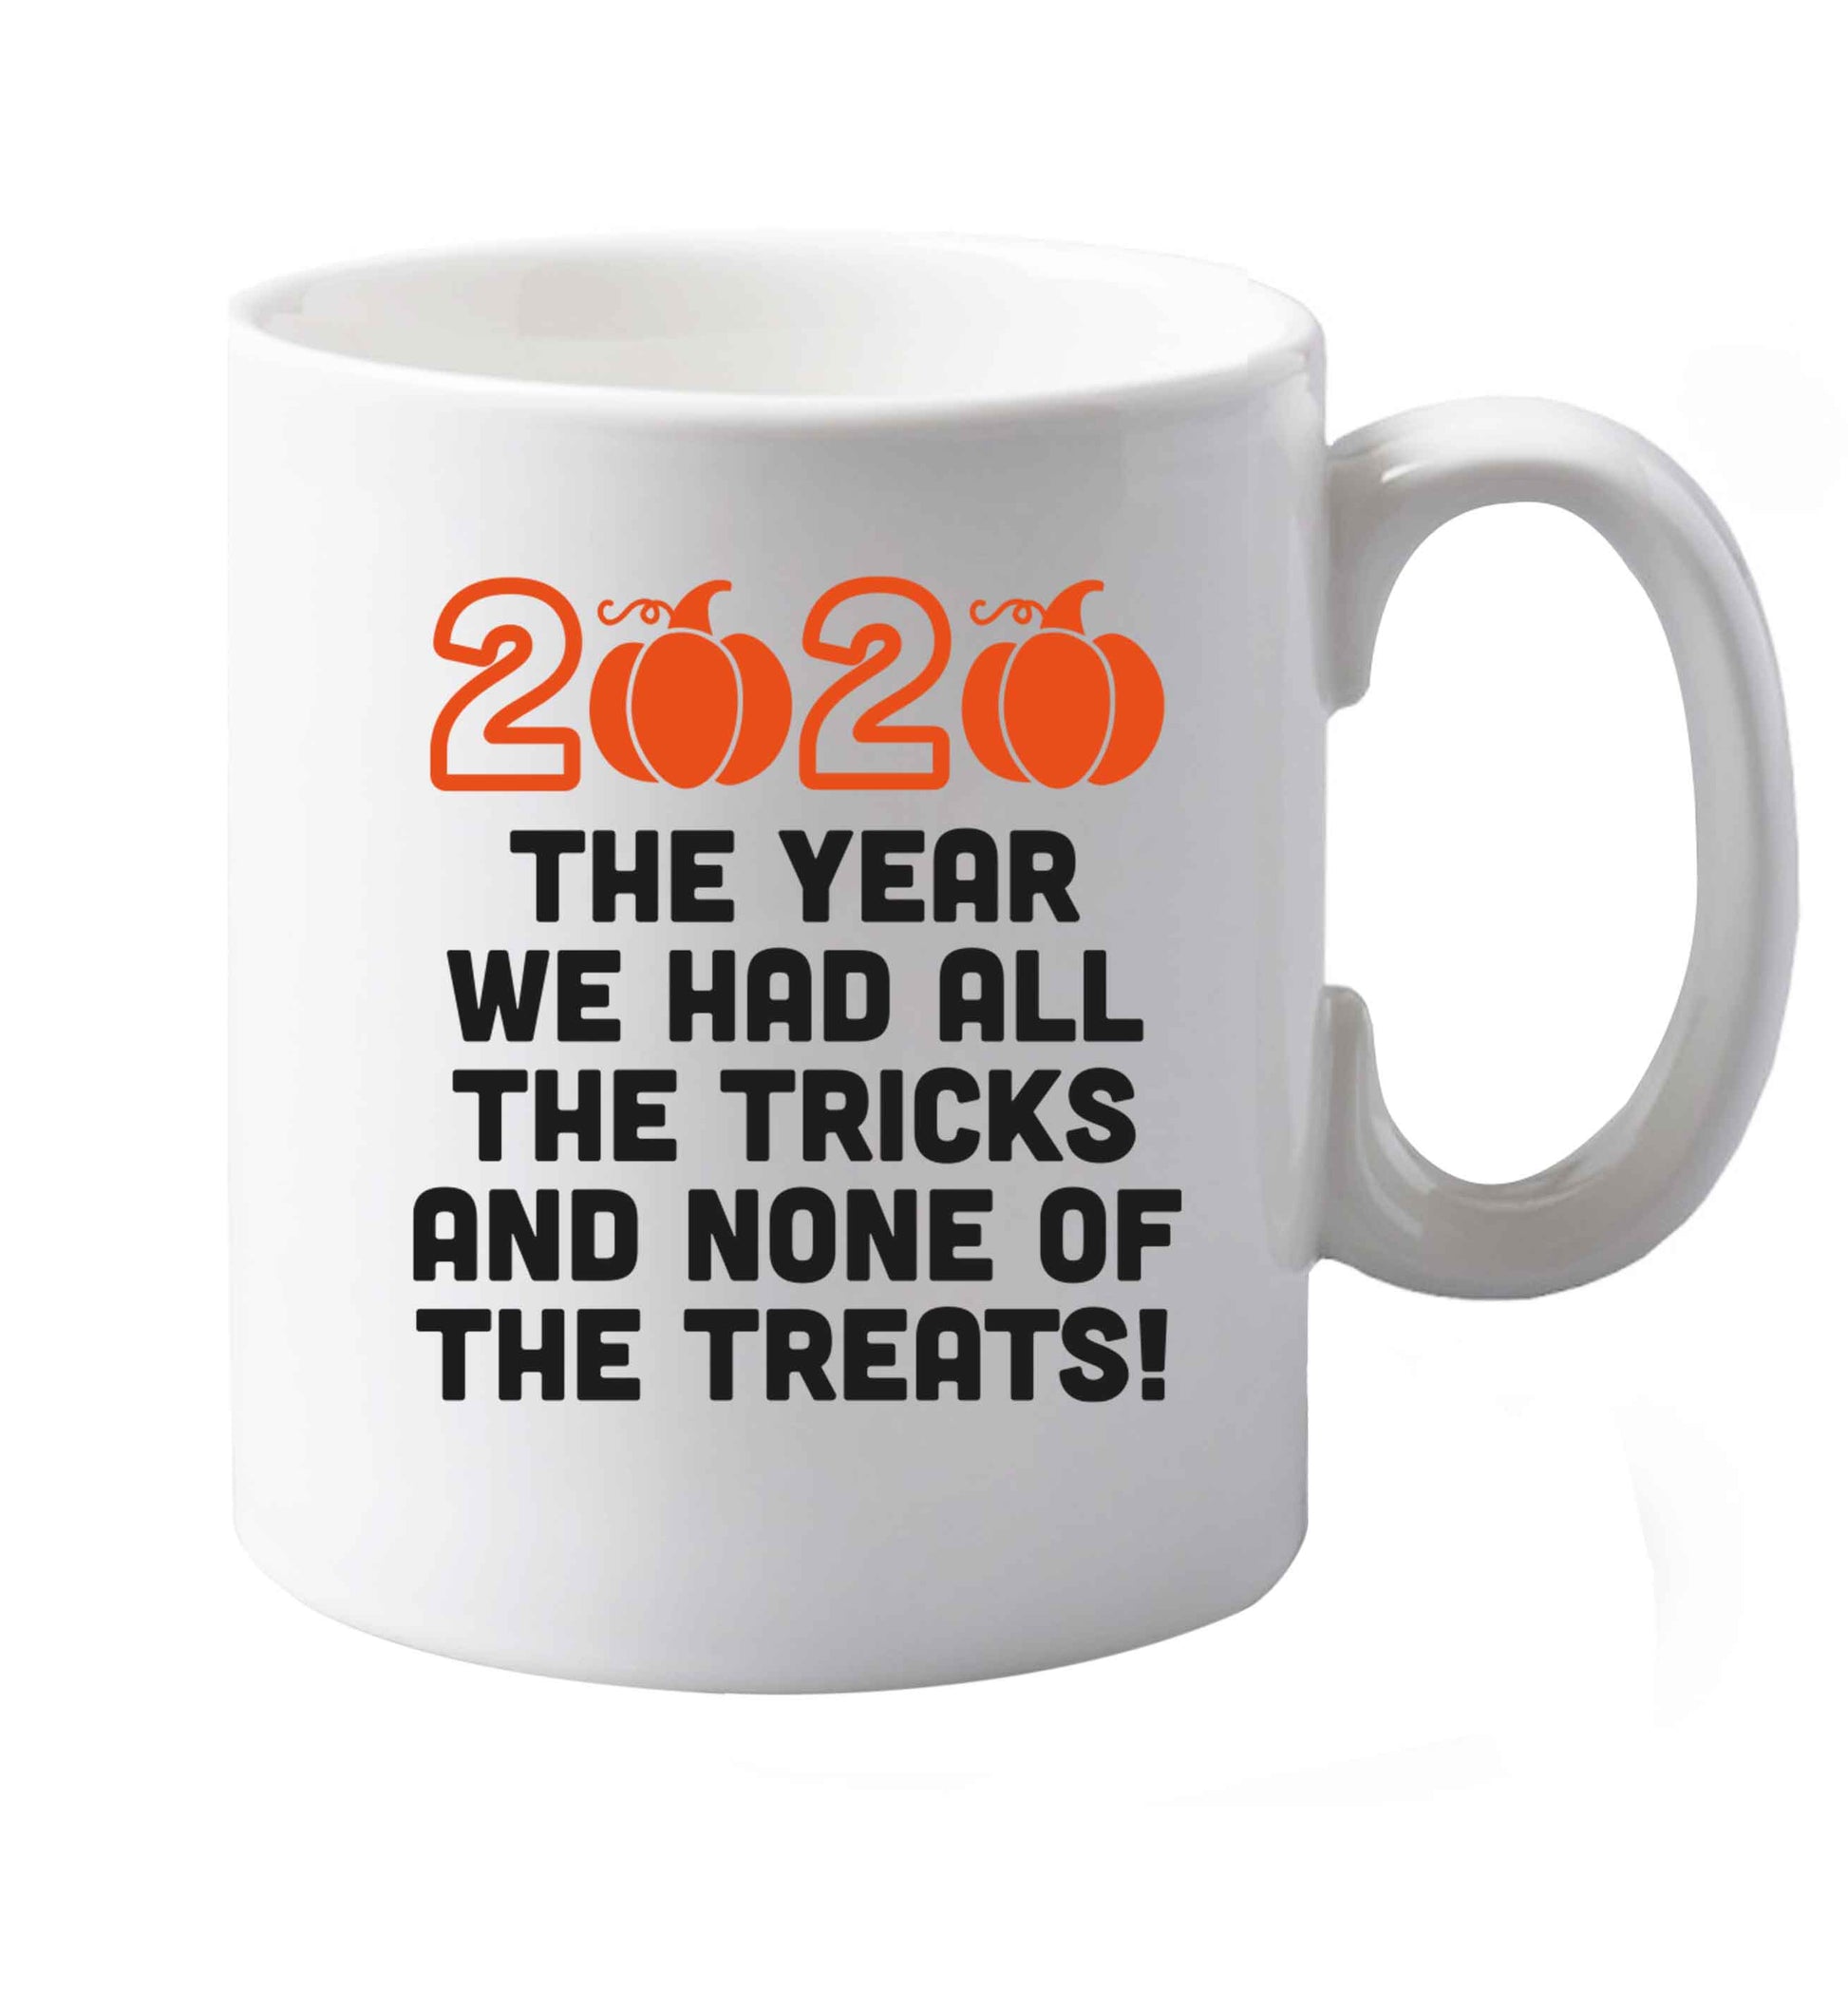 10 oz 2020 The year we had all of the tricks and none of the treats ceramic mug both sides